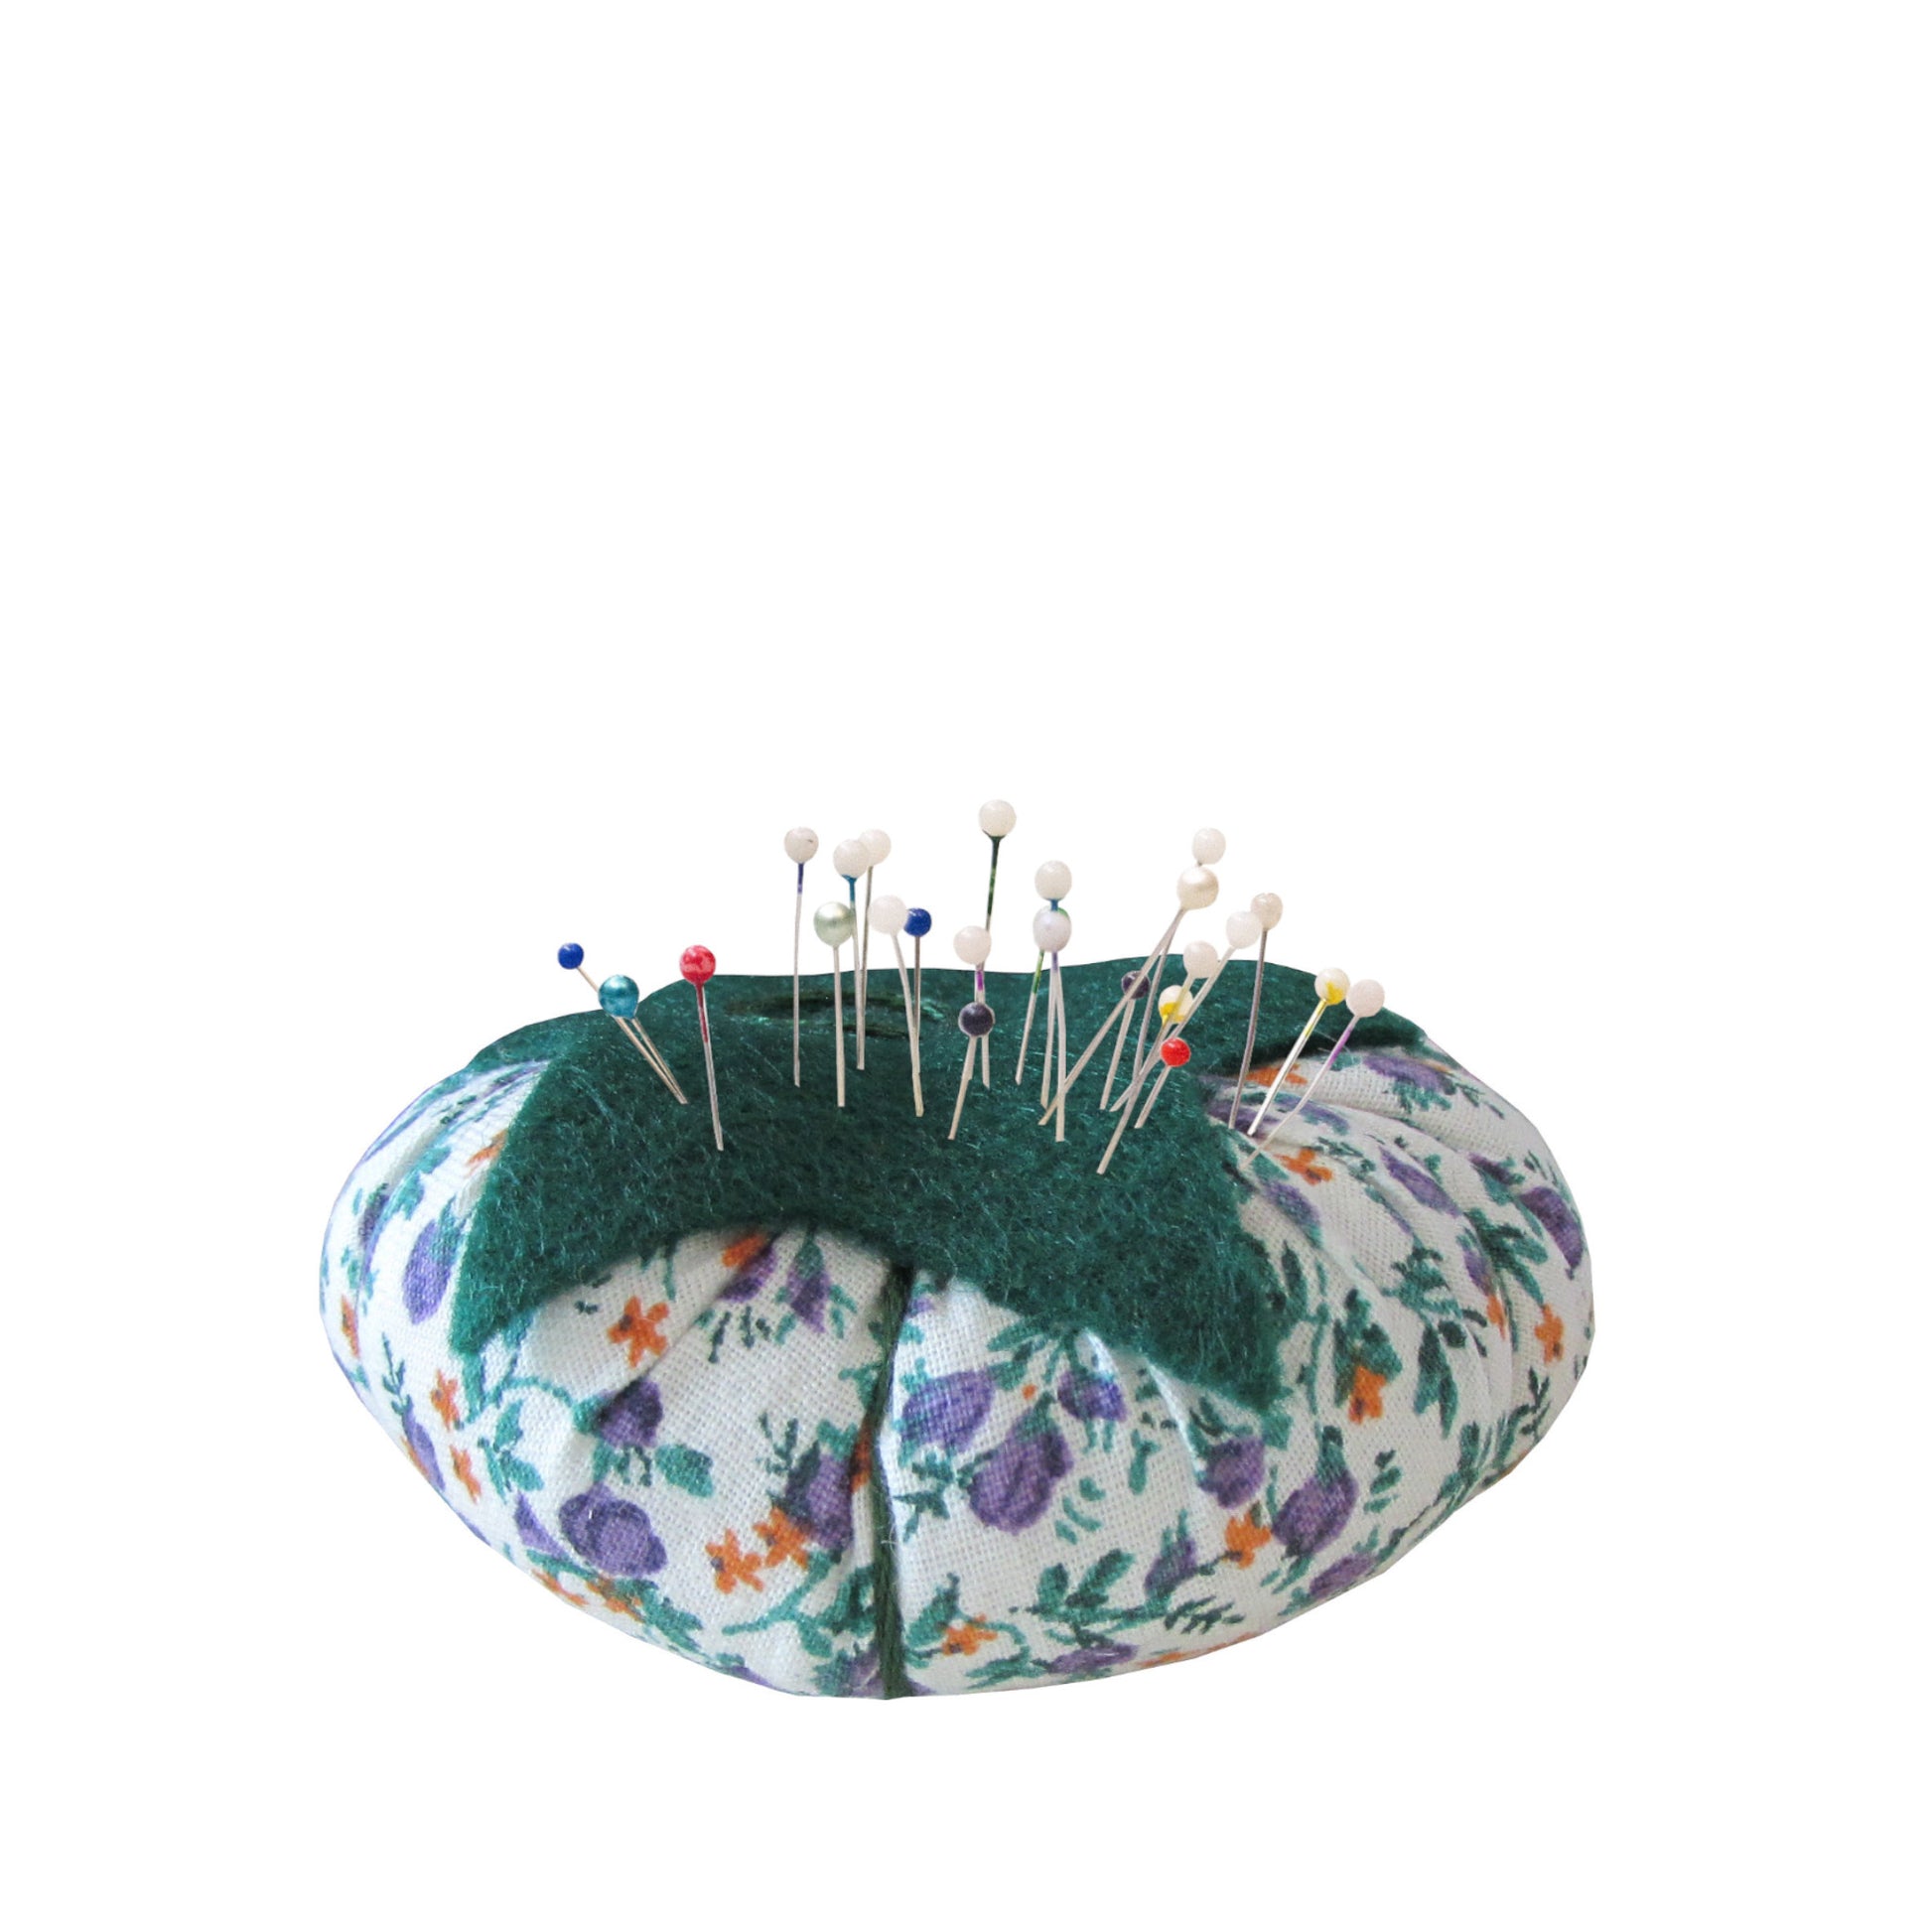 Green Top Purple, Orange, Green, and White Floral Print Tomato Pincushion with pins